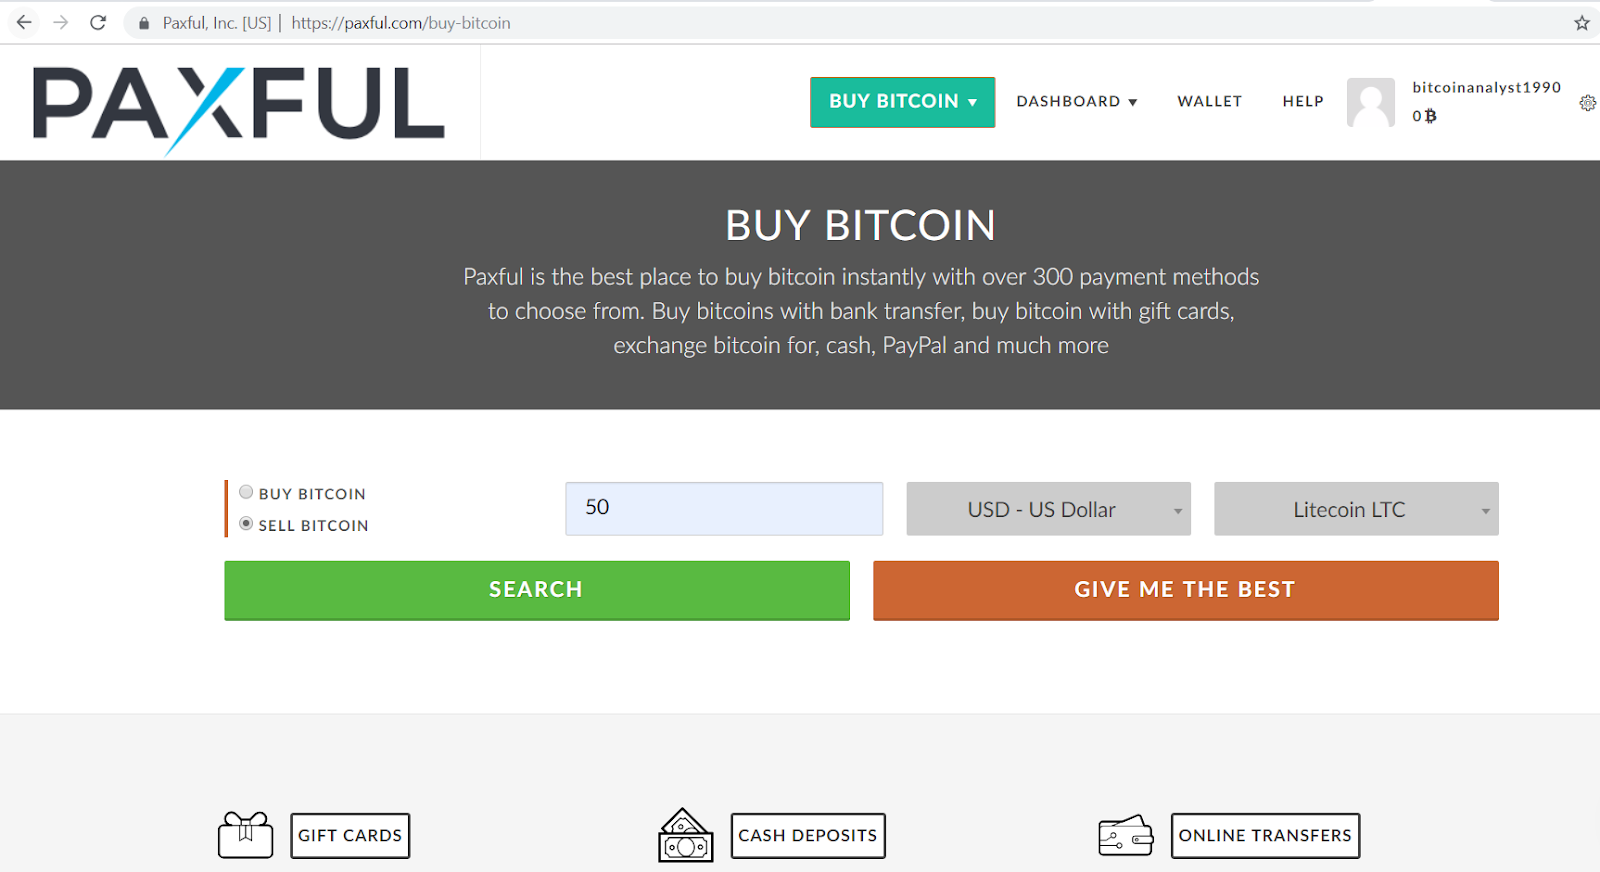 Paxful buy bitcoin amount form.